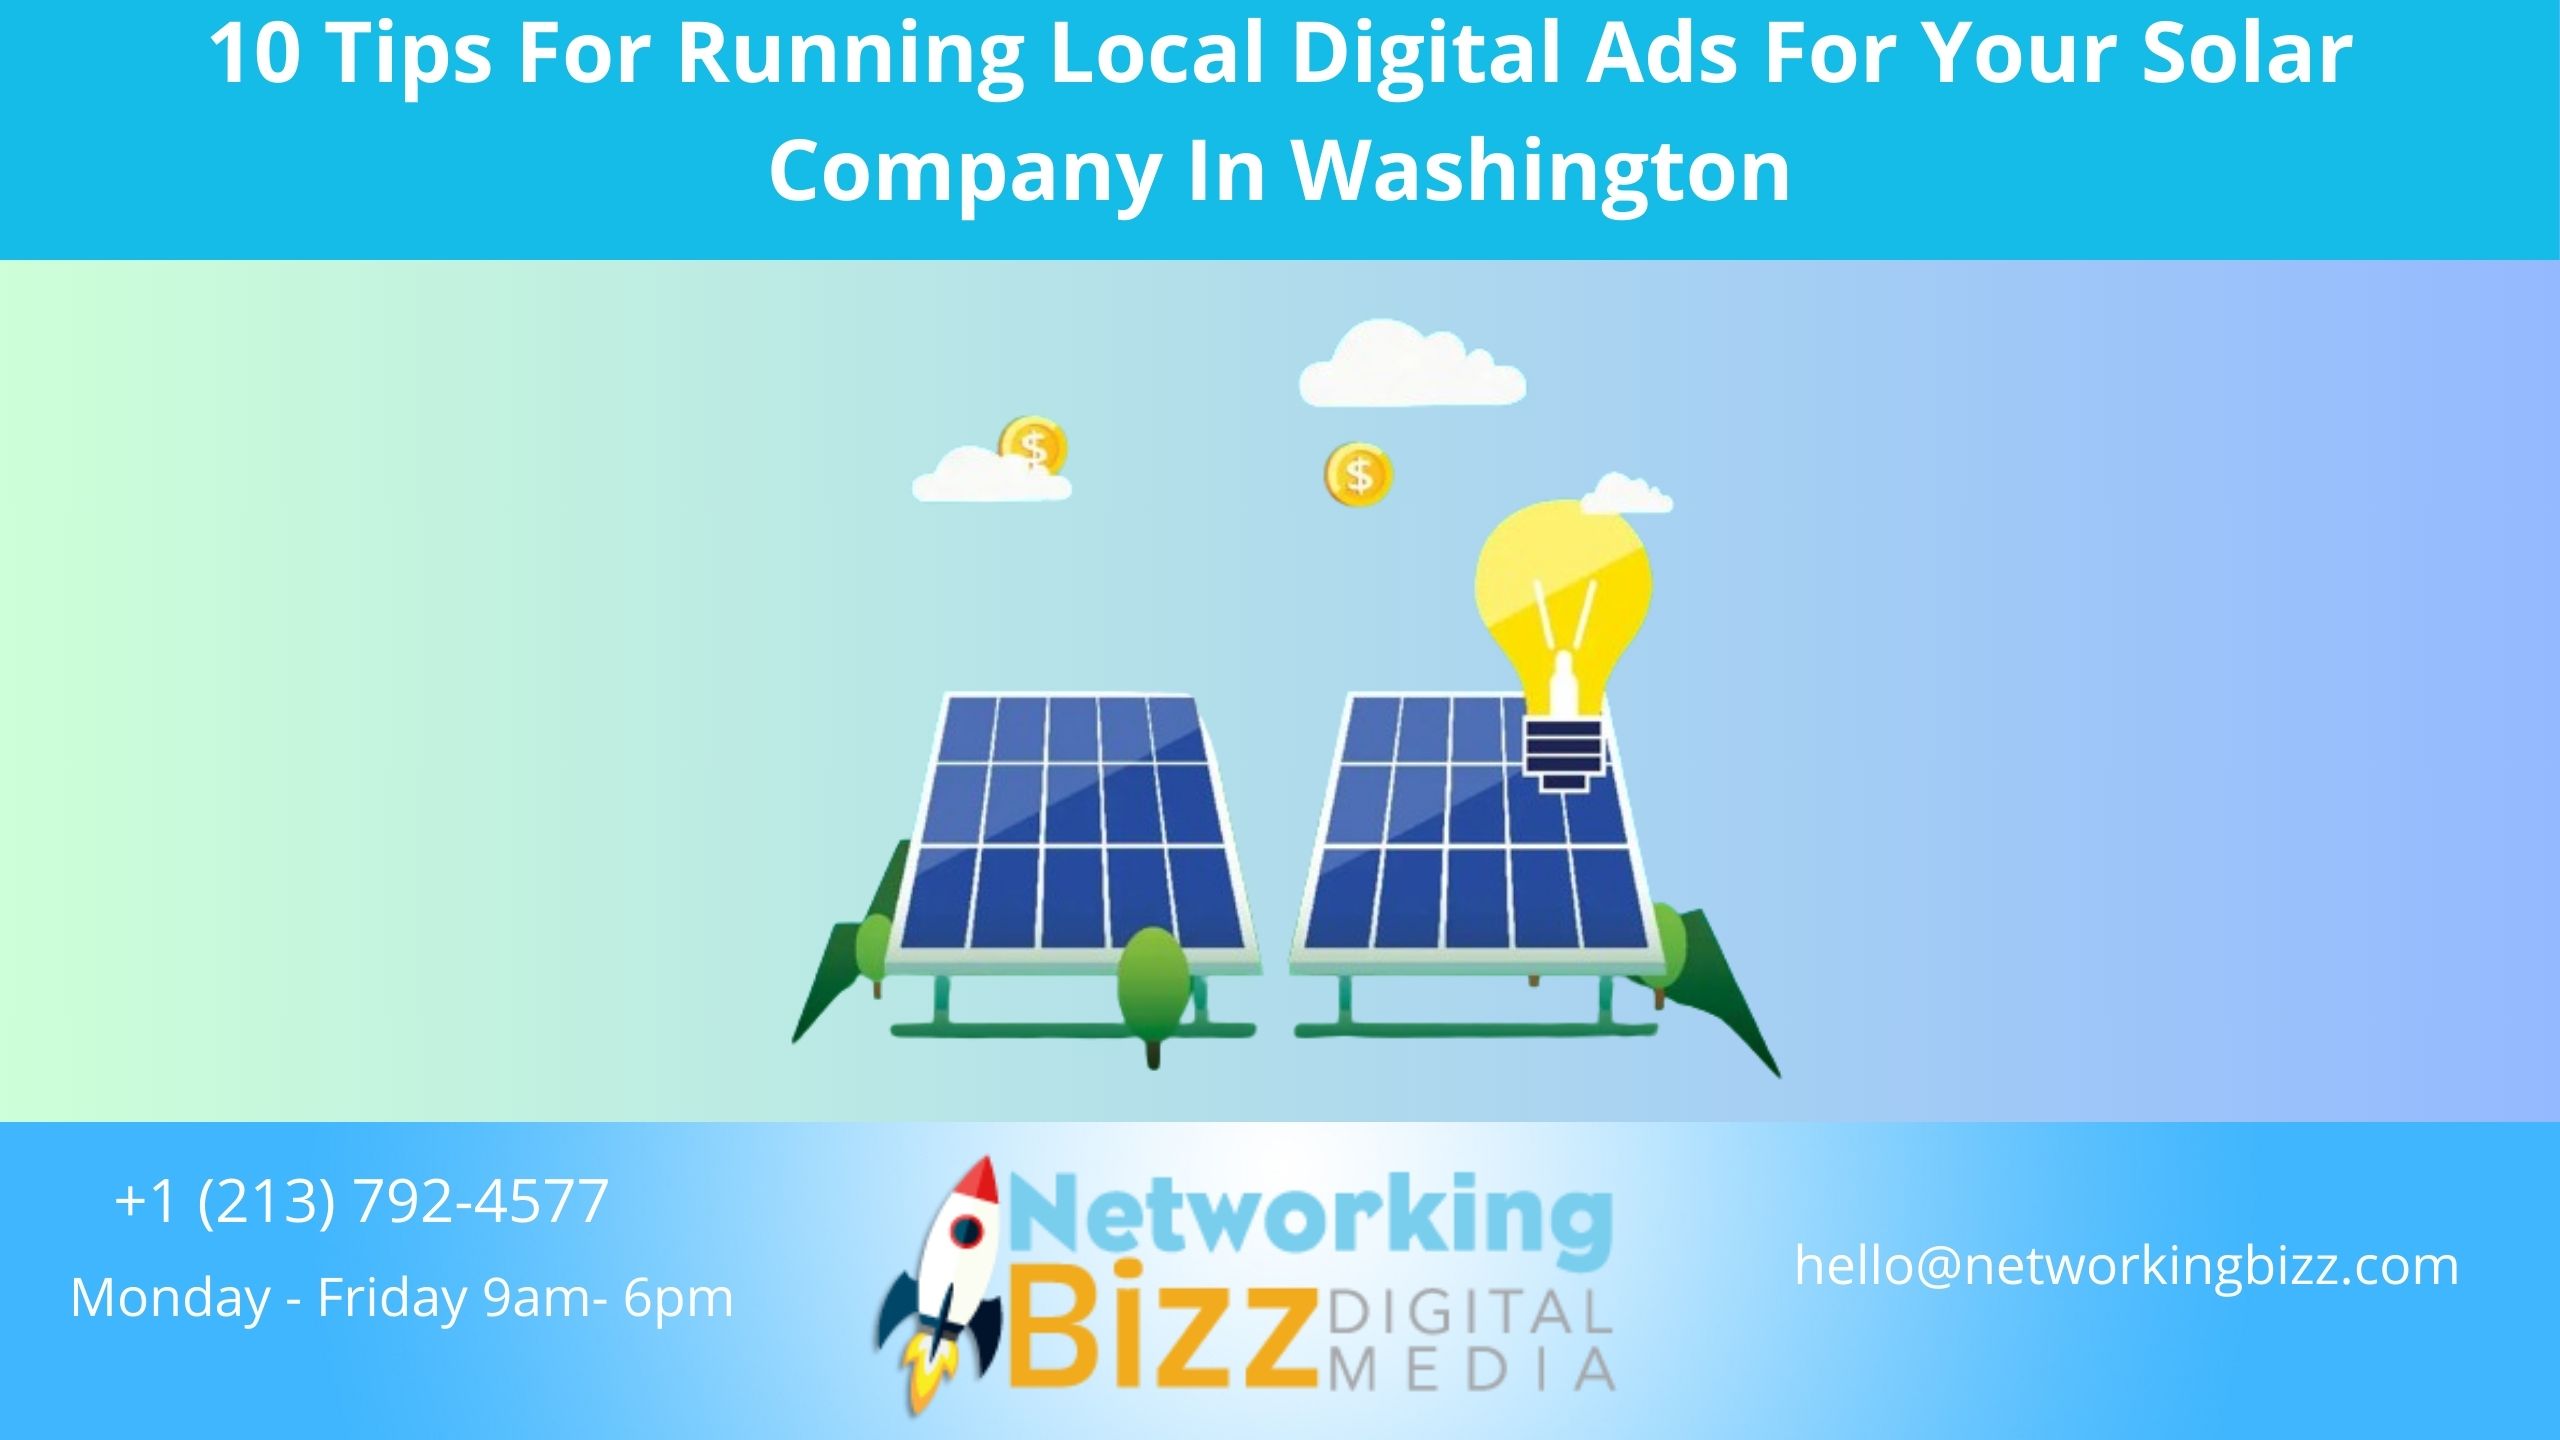 10 Tips For Running Local Digital Ads For Your Solar Company In Washington